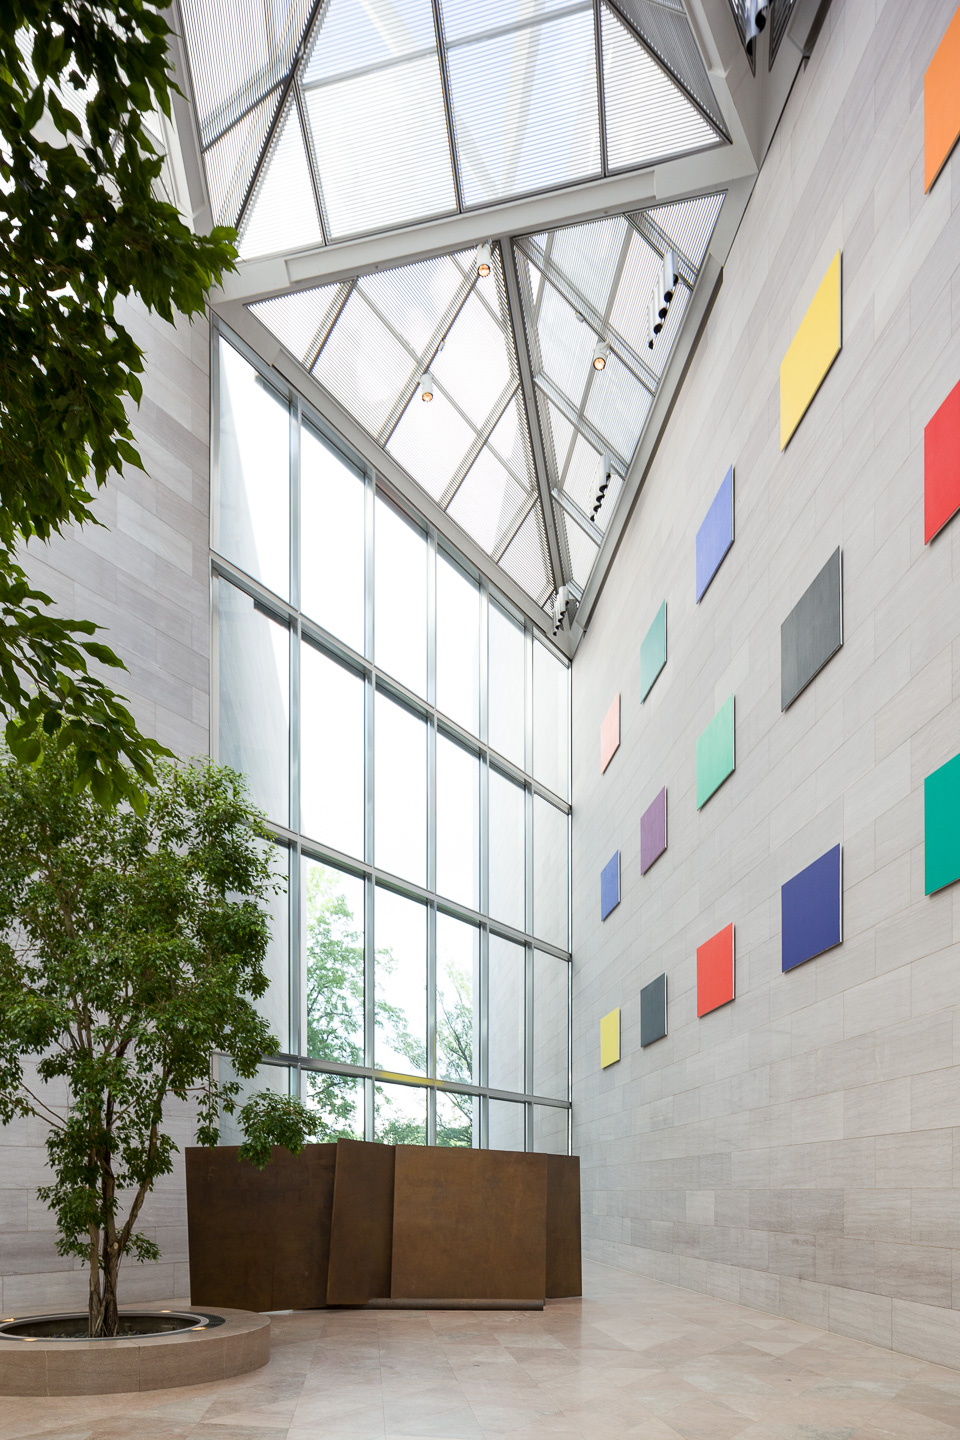 National Gallery East Building in Washington DC by architect I.M. Pei. Color Panels for a Large Wall installation by Ellsworth Kelly. Photo by Jason R. Woods.